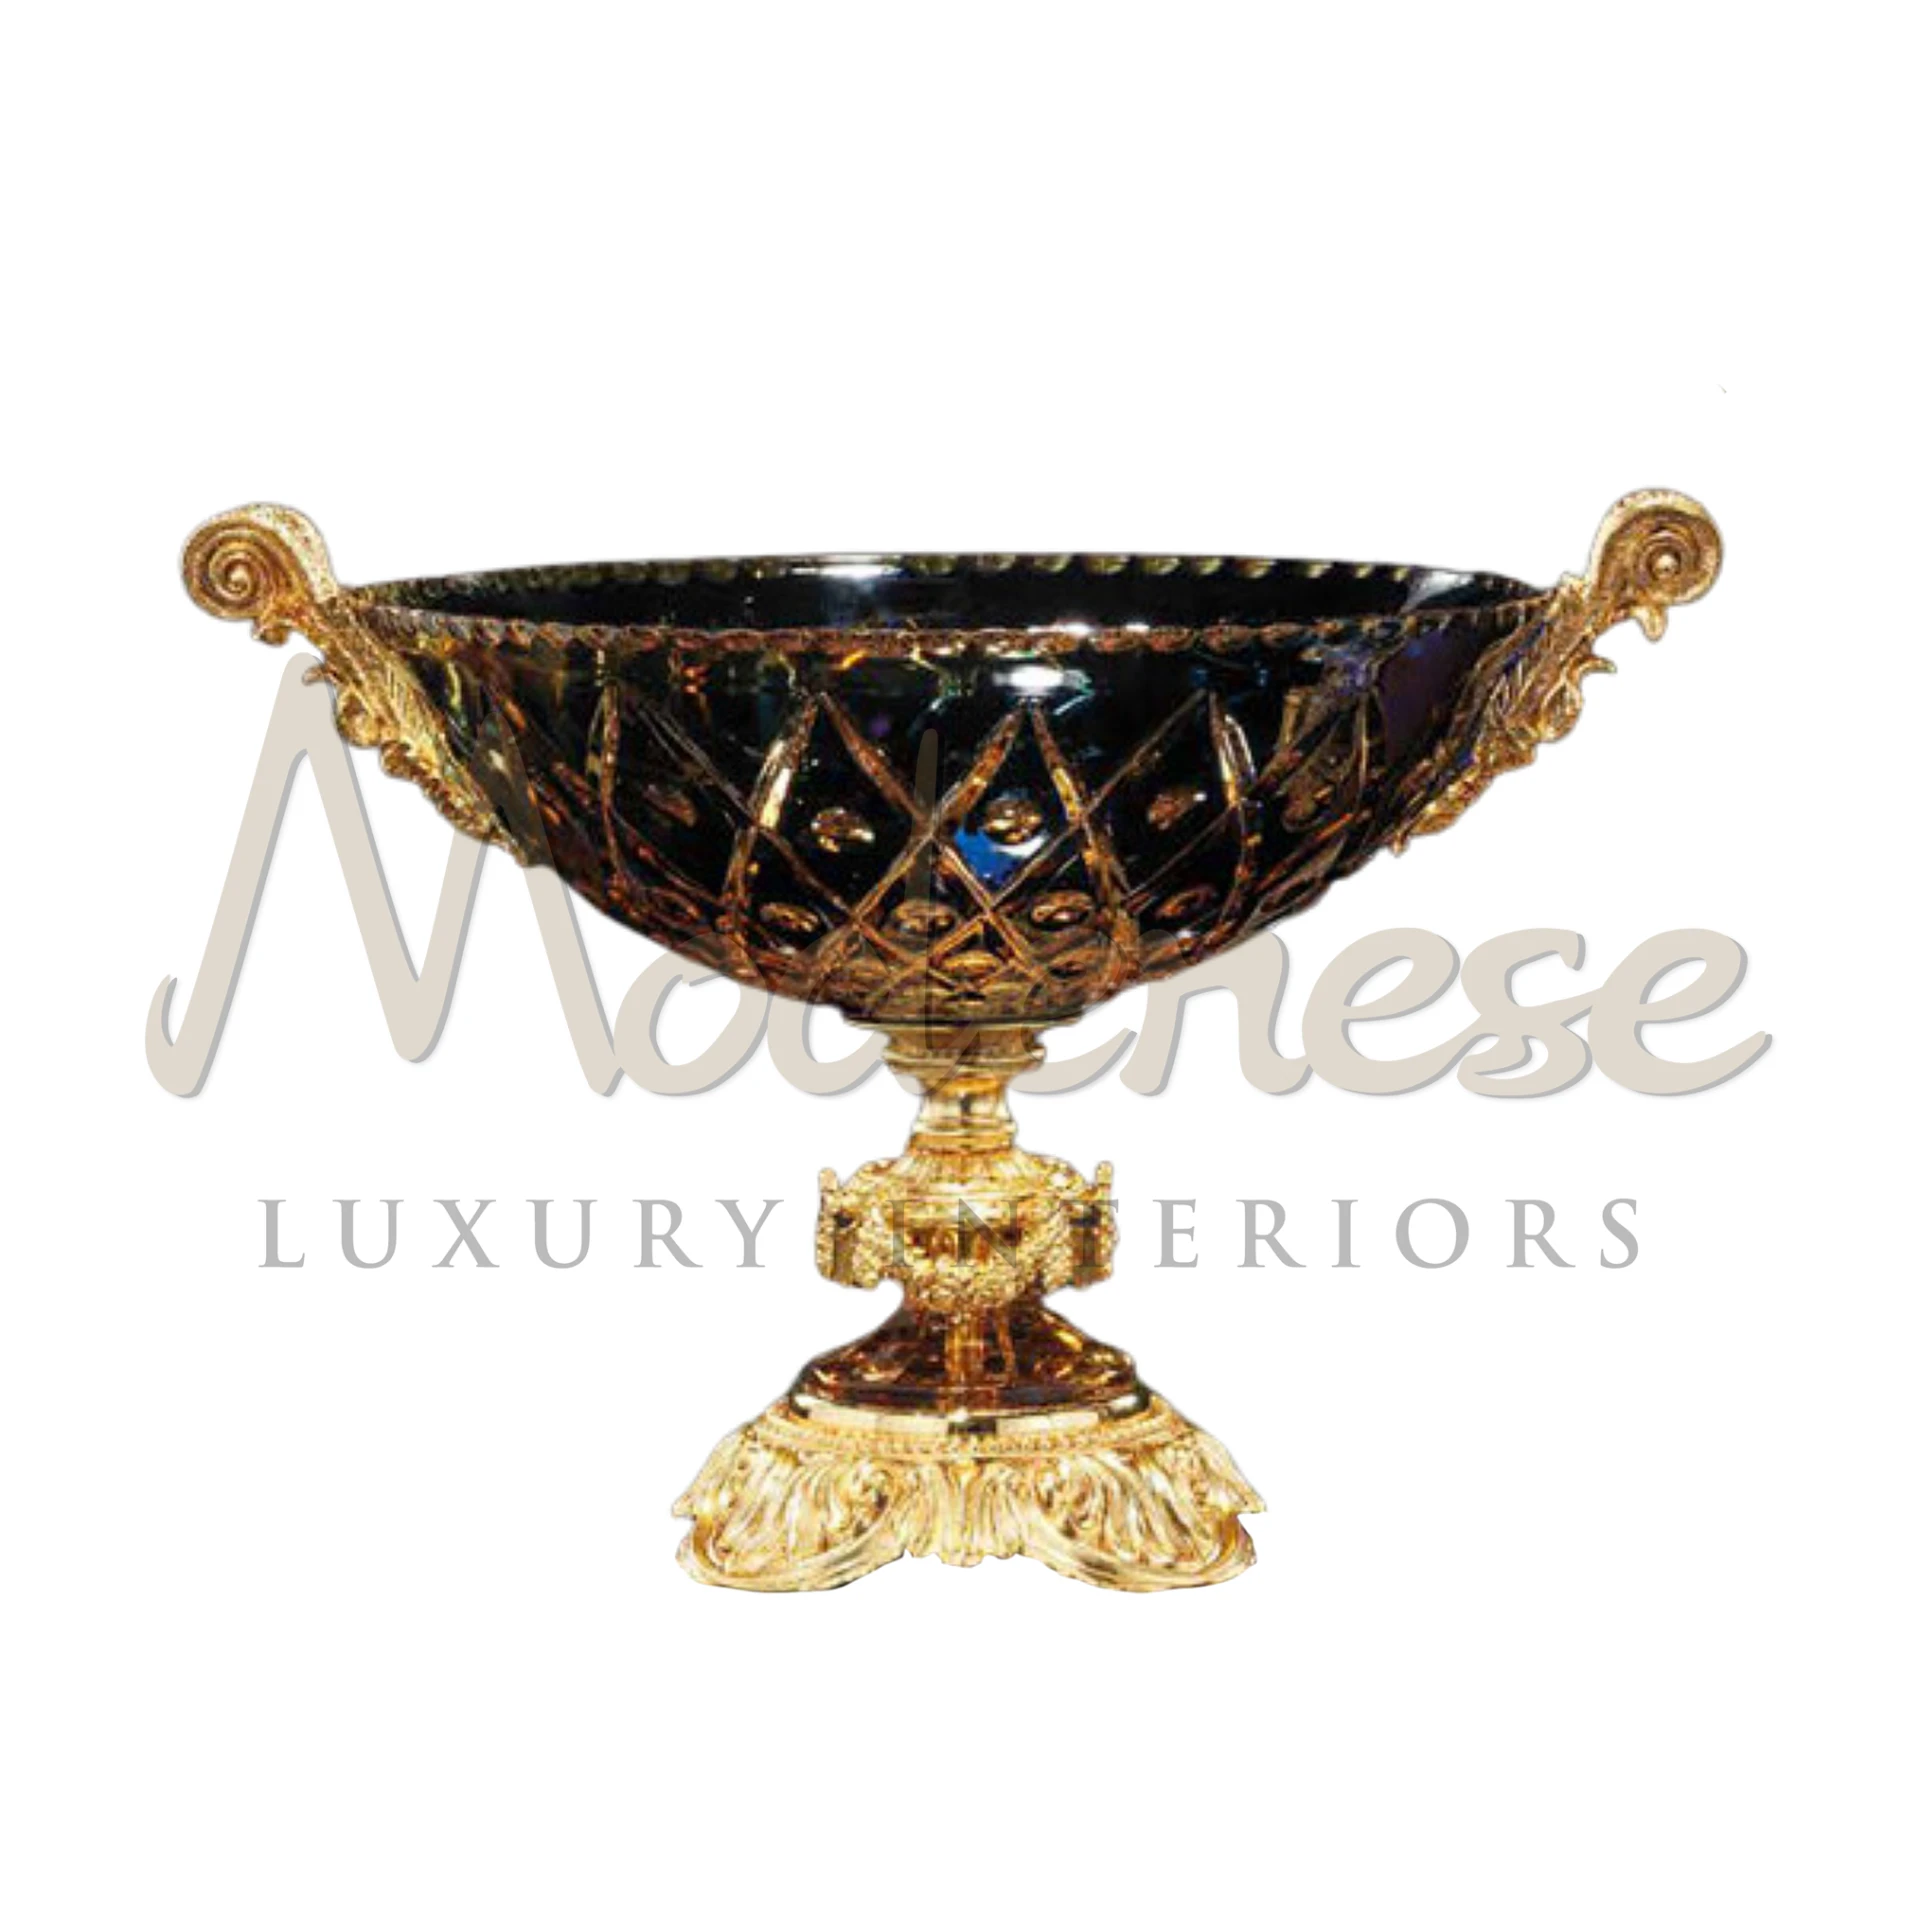 Traditional Figured Black Glass Bowl by Modenese, showcasing sophistication in high-quality black glass for luxury interiors.